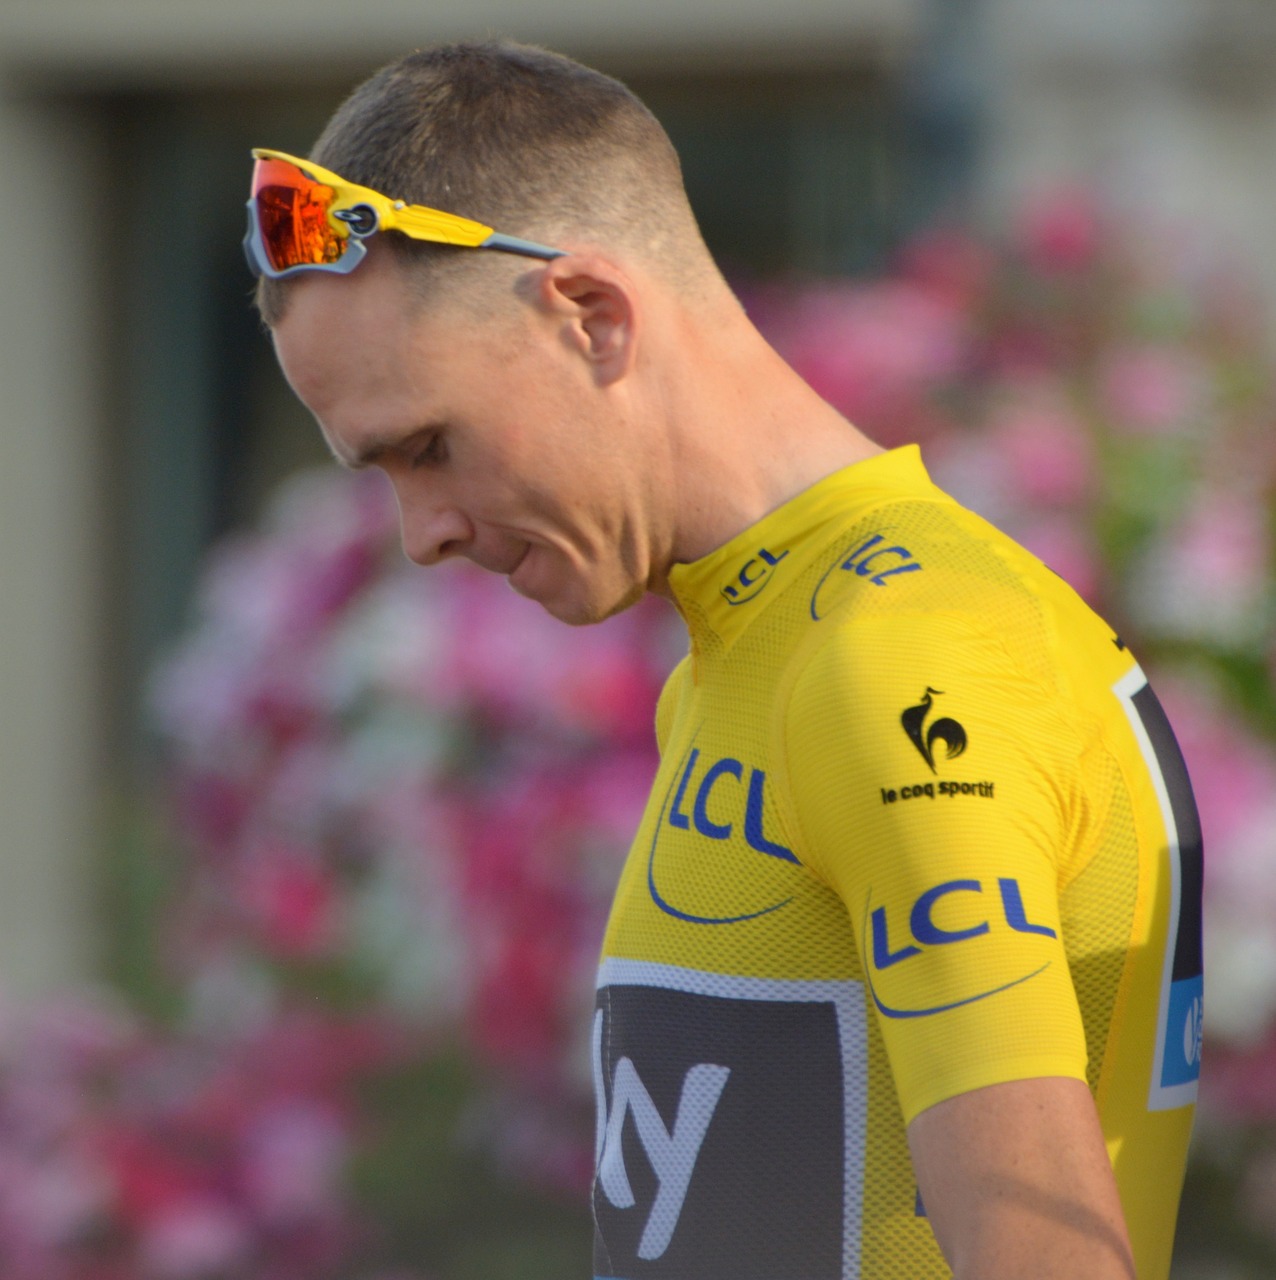 chris froome yellow jersey professional road bicycle racer free photo